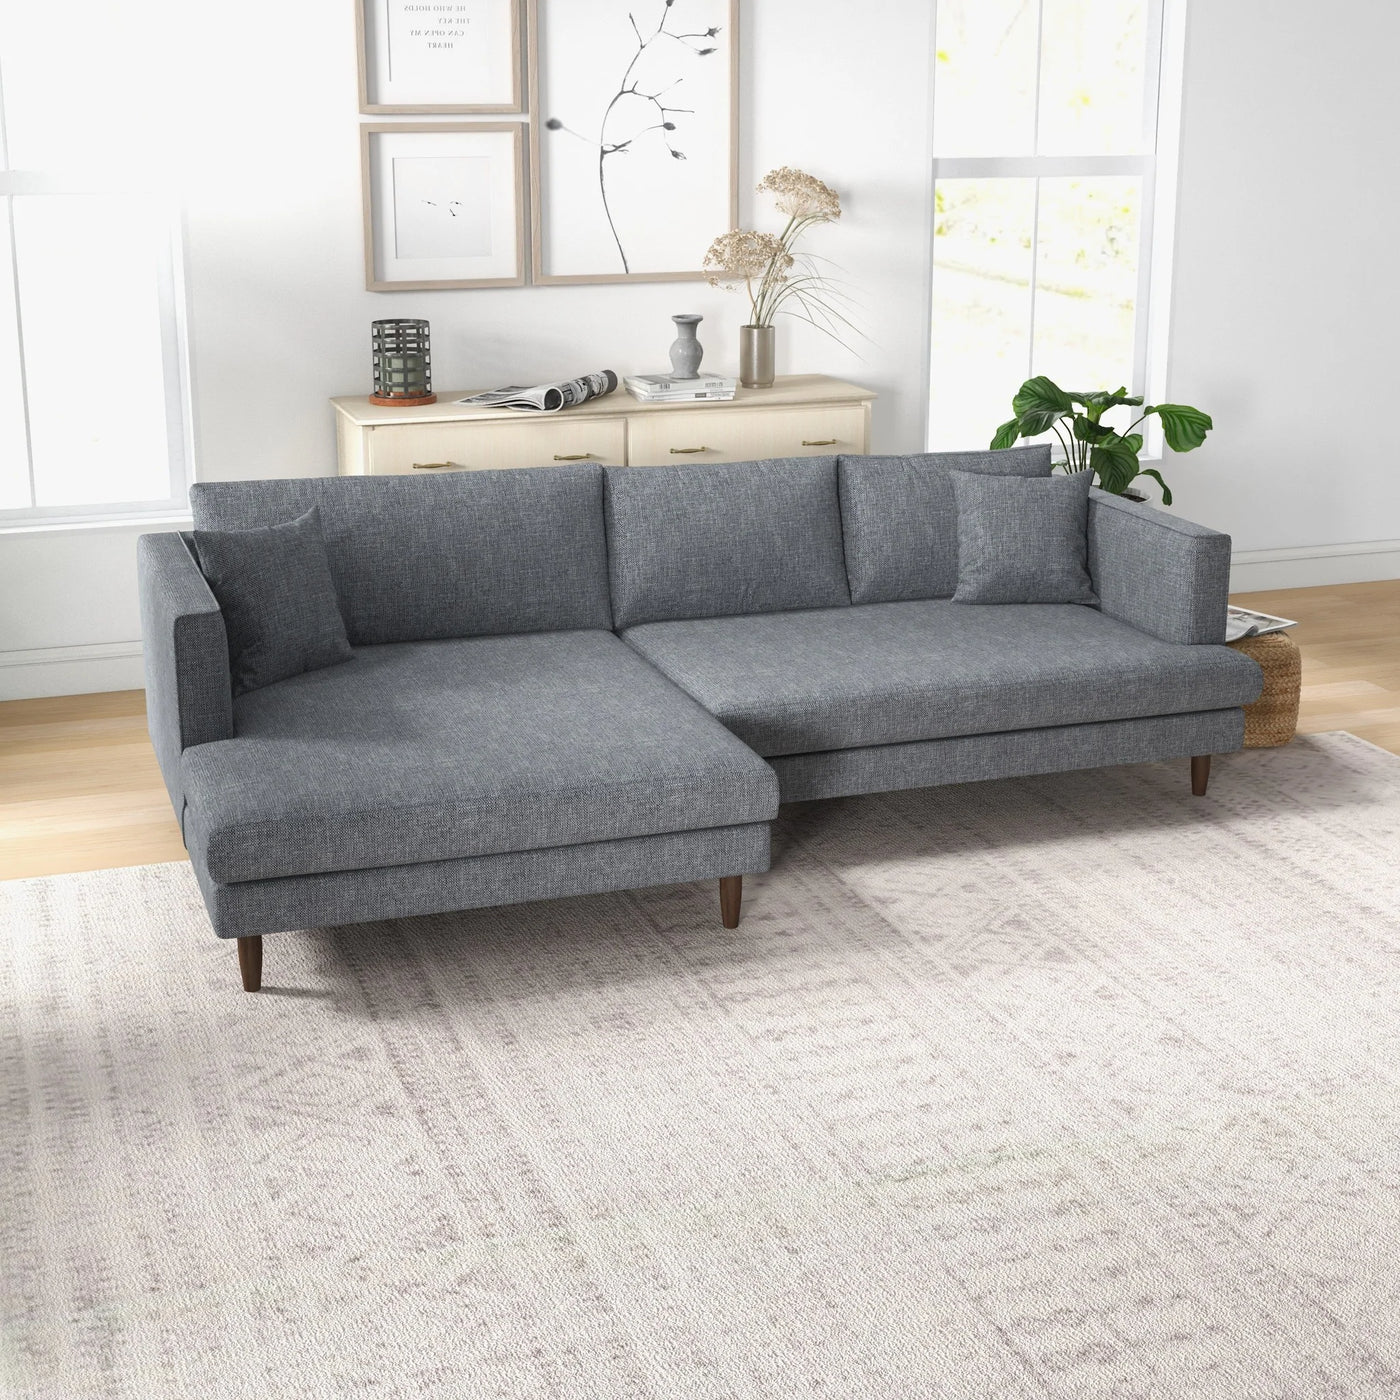 Mid-Century Modern Sectional Sofa in Grey Linen - Left or Right Chaise